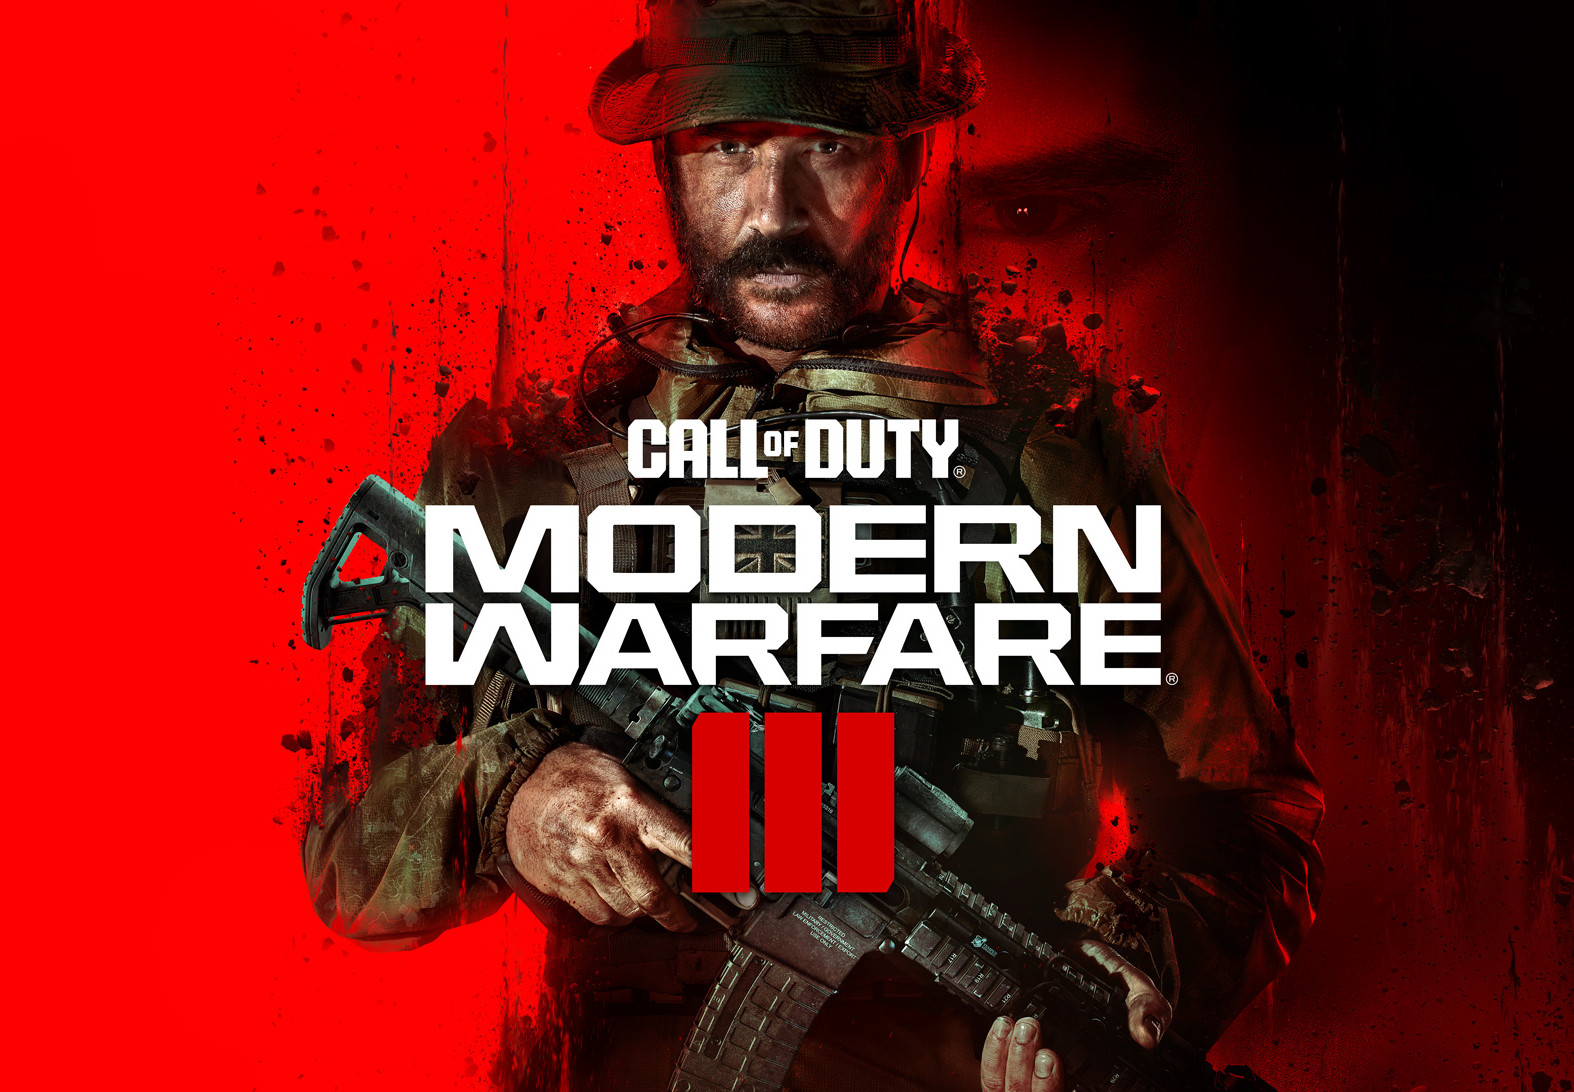 Image of Call of Duty: Modern Warfare III PlayStation 5 Account pixelpuffinnet Activation Link TR